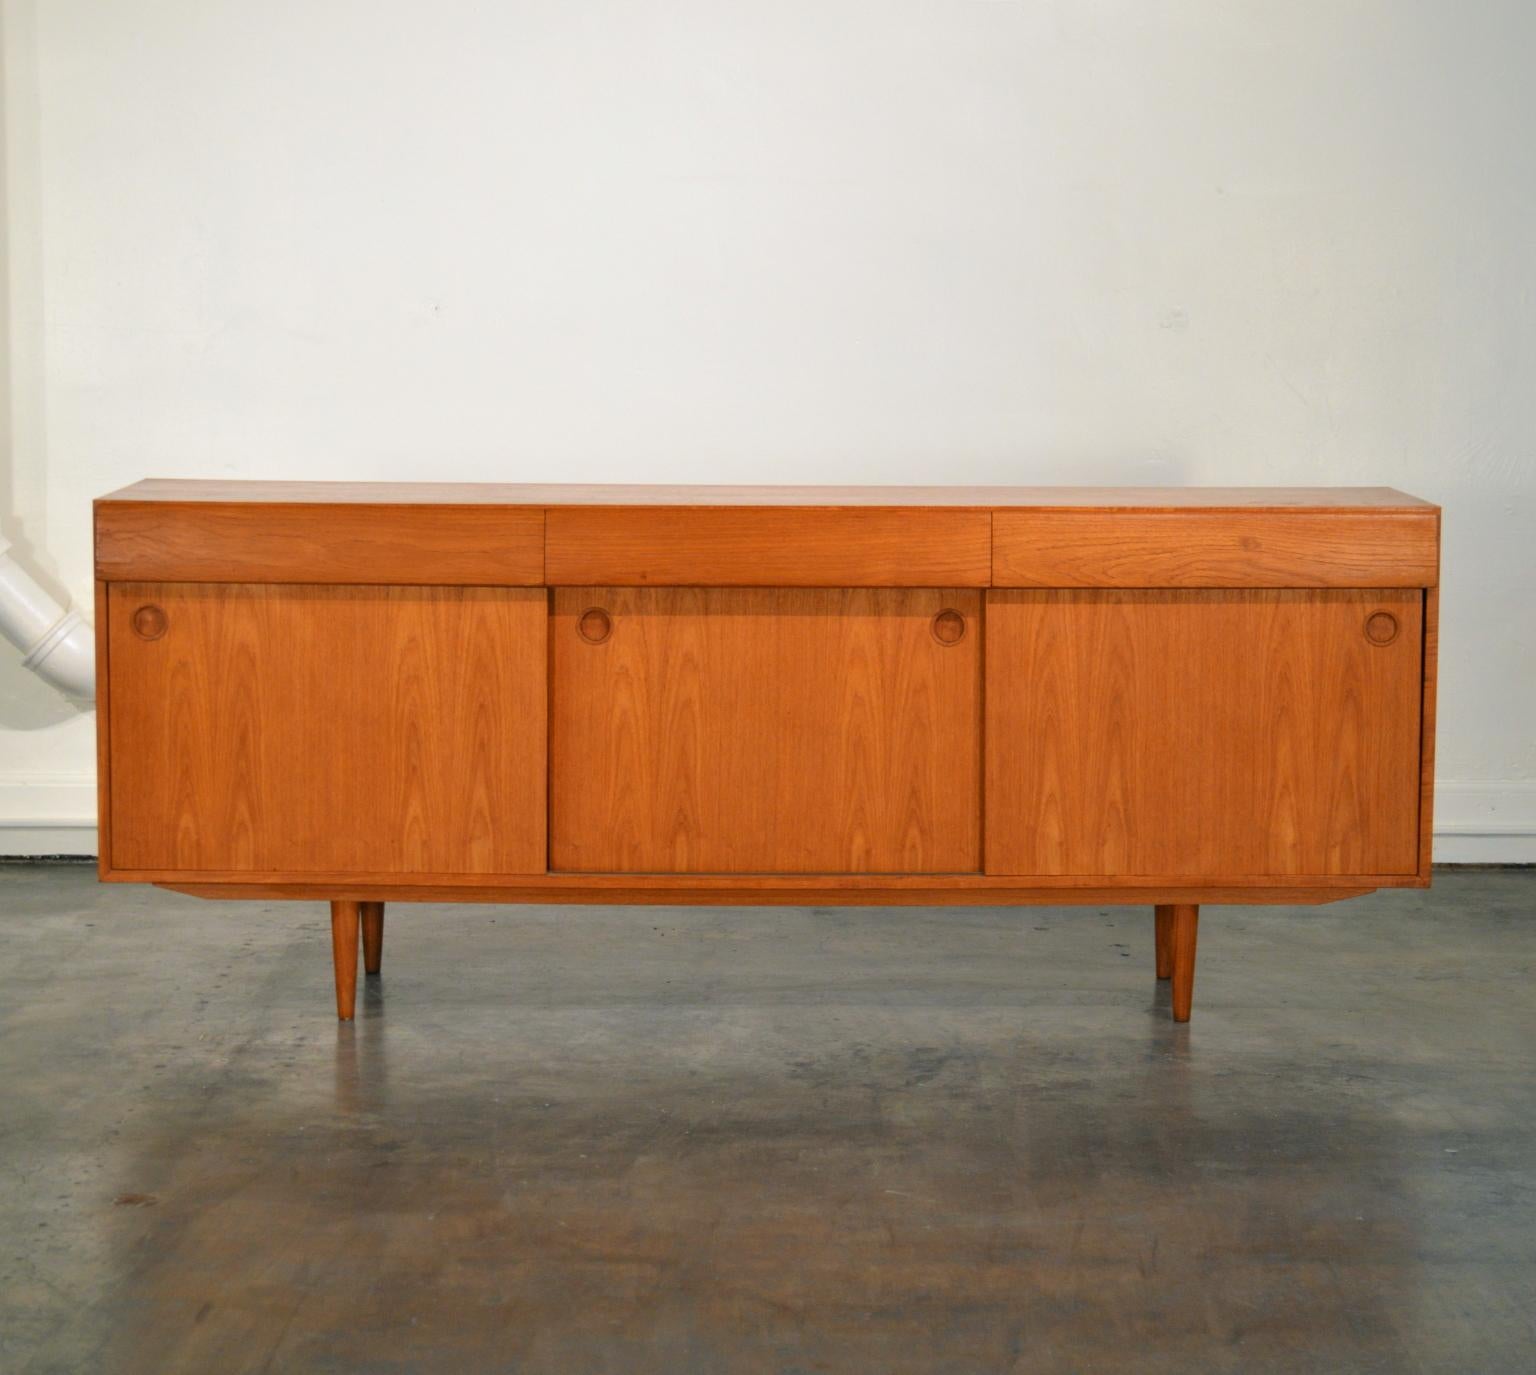 Stately 360 degree finished Teak Sideboard with three drawers on the top, having curved faces and hidden channel pulls. The three sliding front doors have expertly crafted inverted teak circular knobs. The top left drawer features a secondary